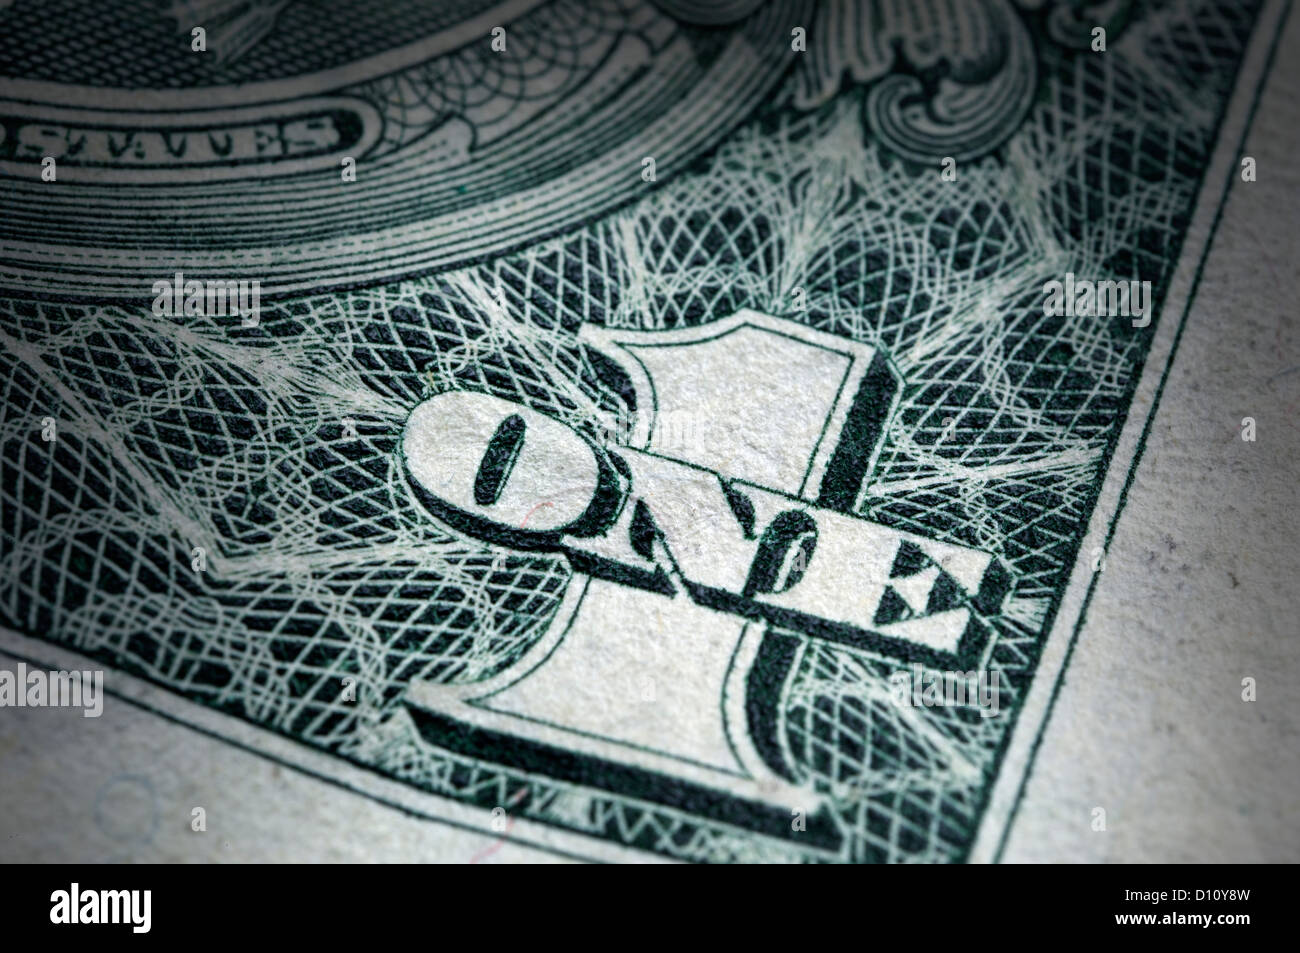 Detail of a US dollar bill Stock Photo